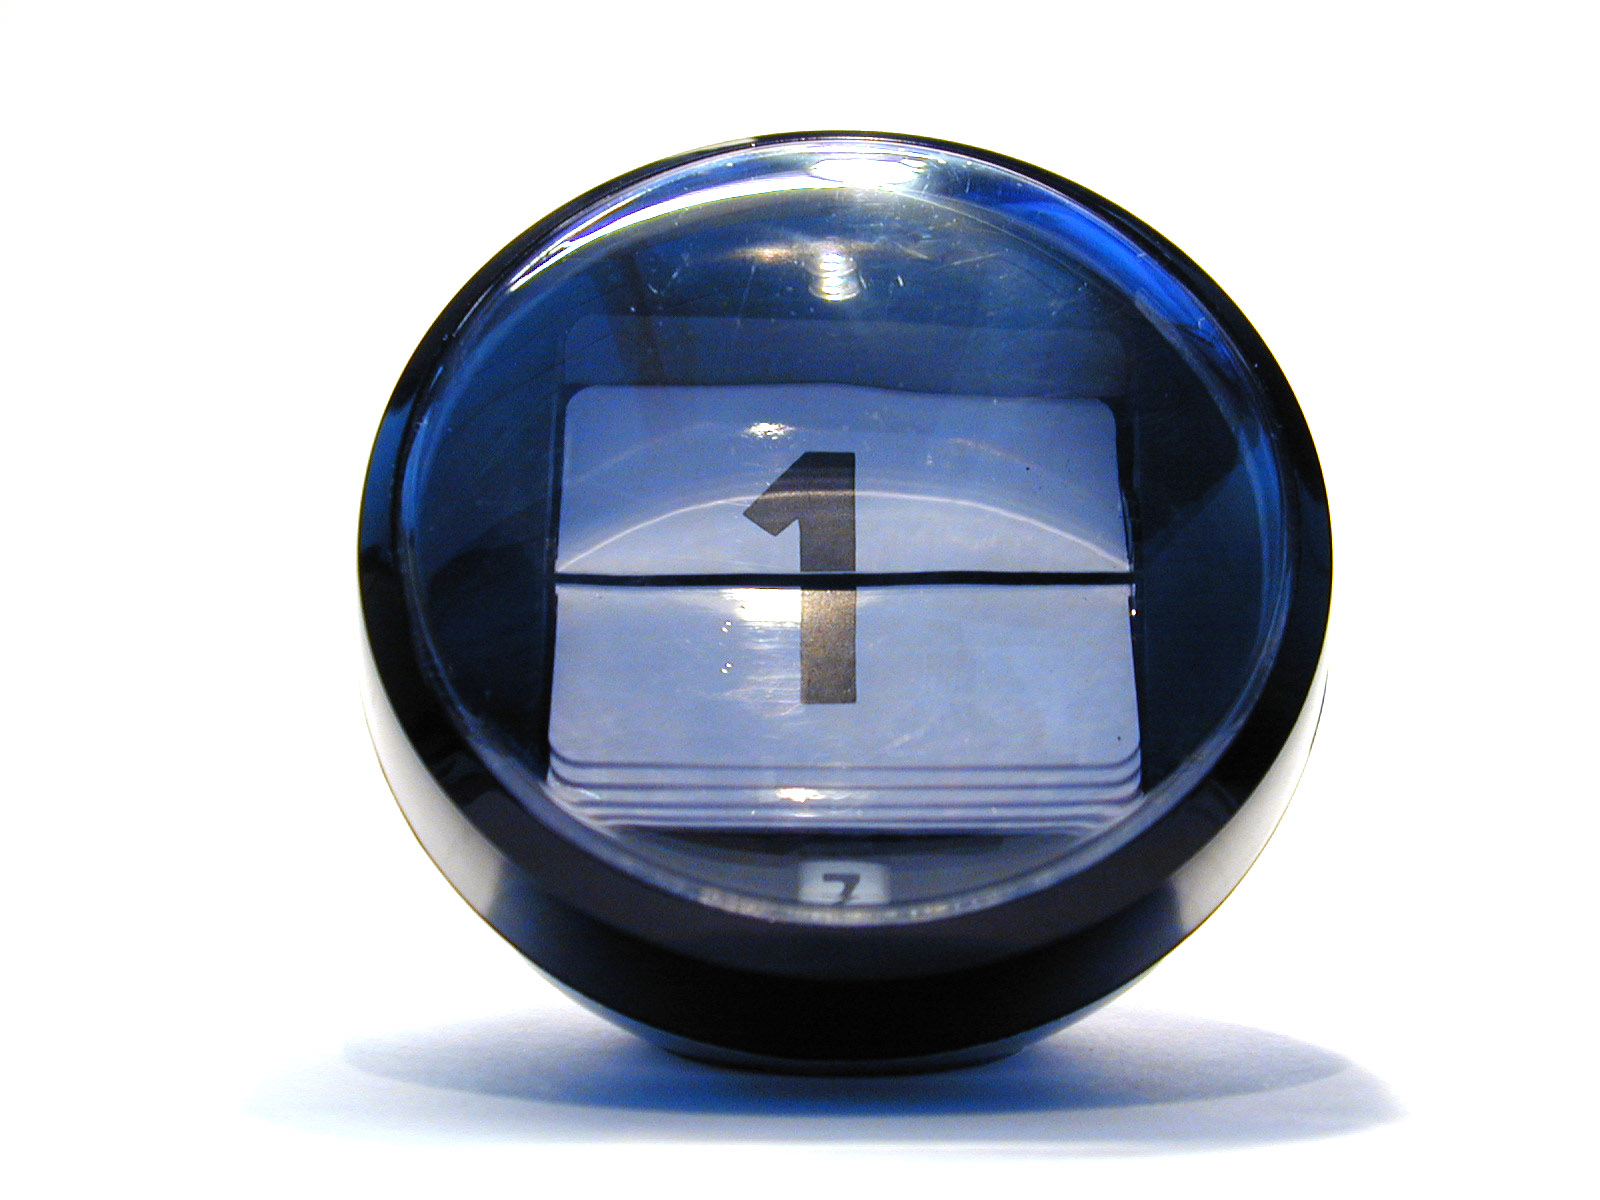 typo typography numbers 1 one sphere plastic objects calendar date